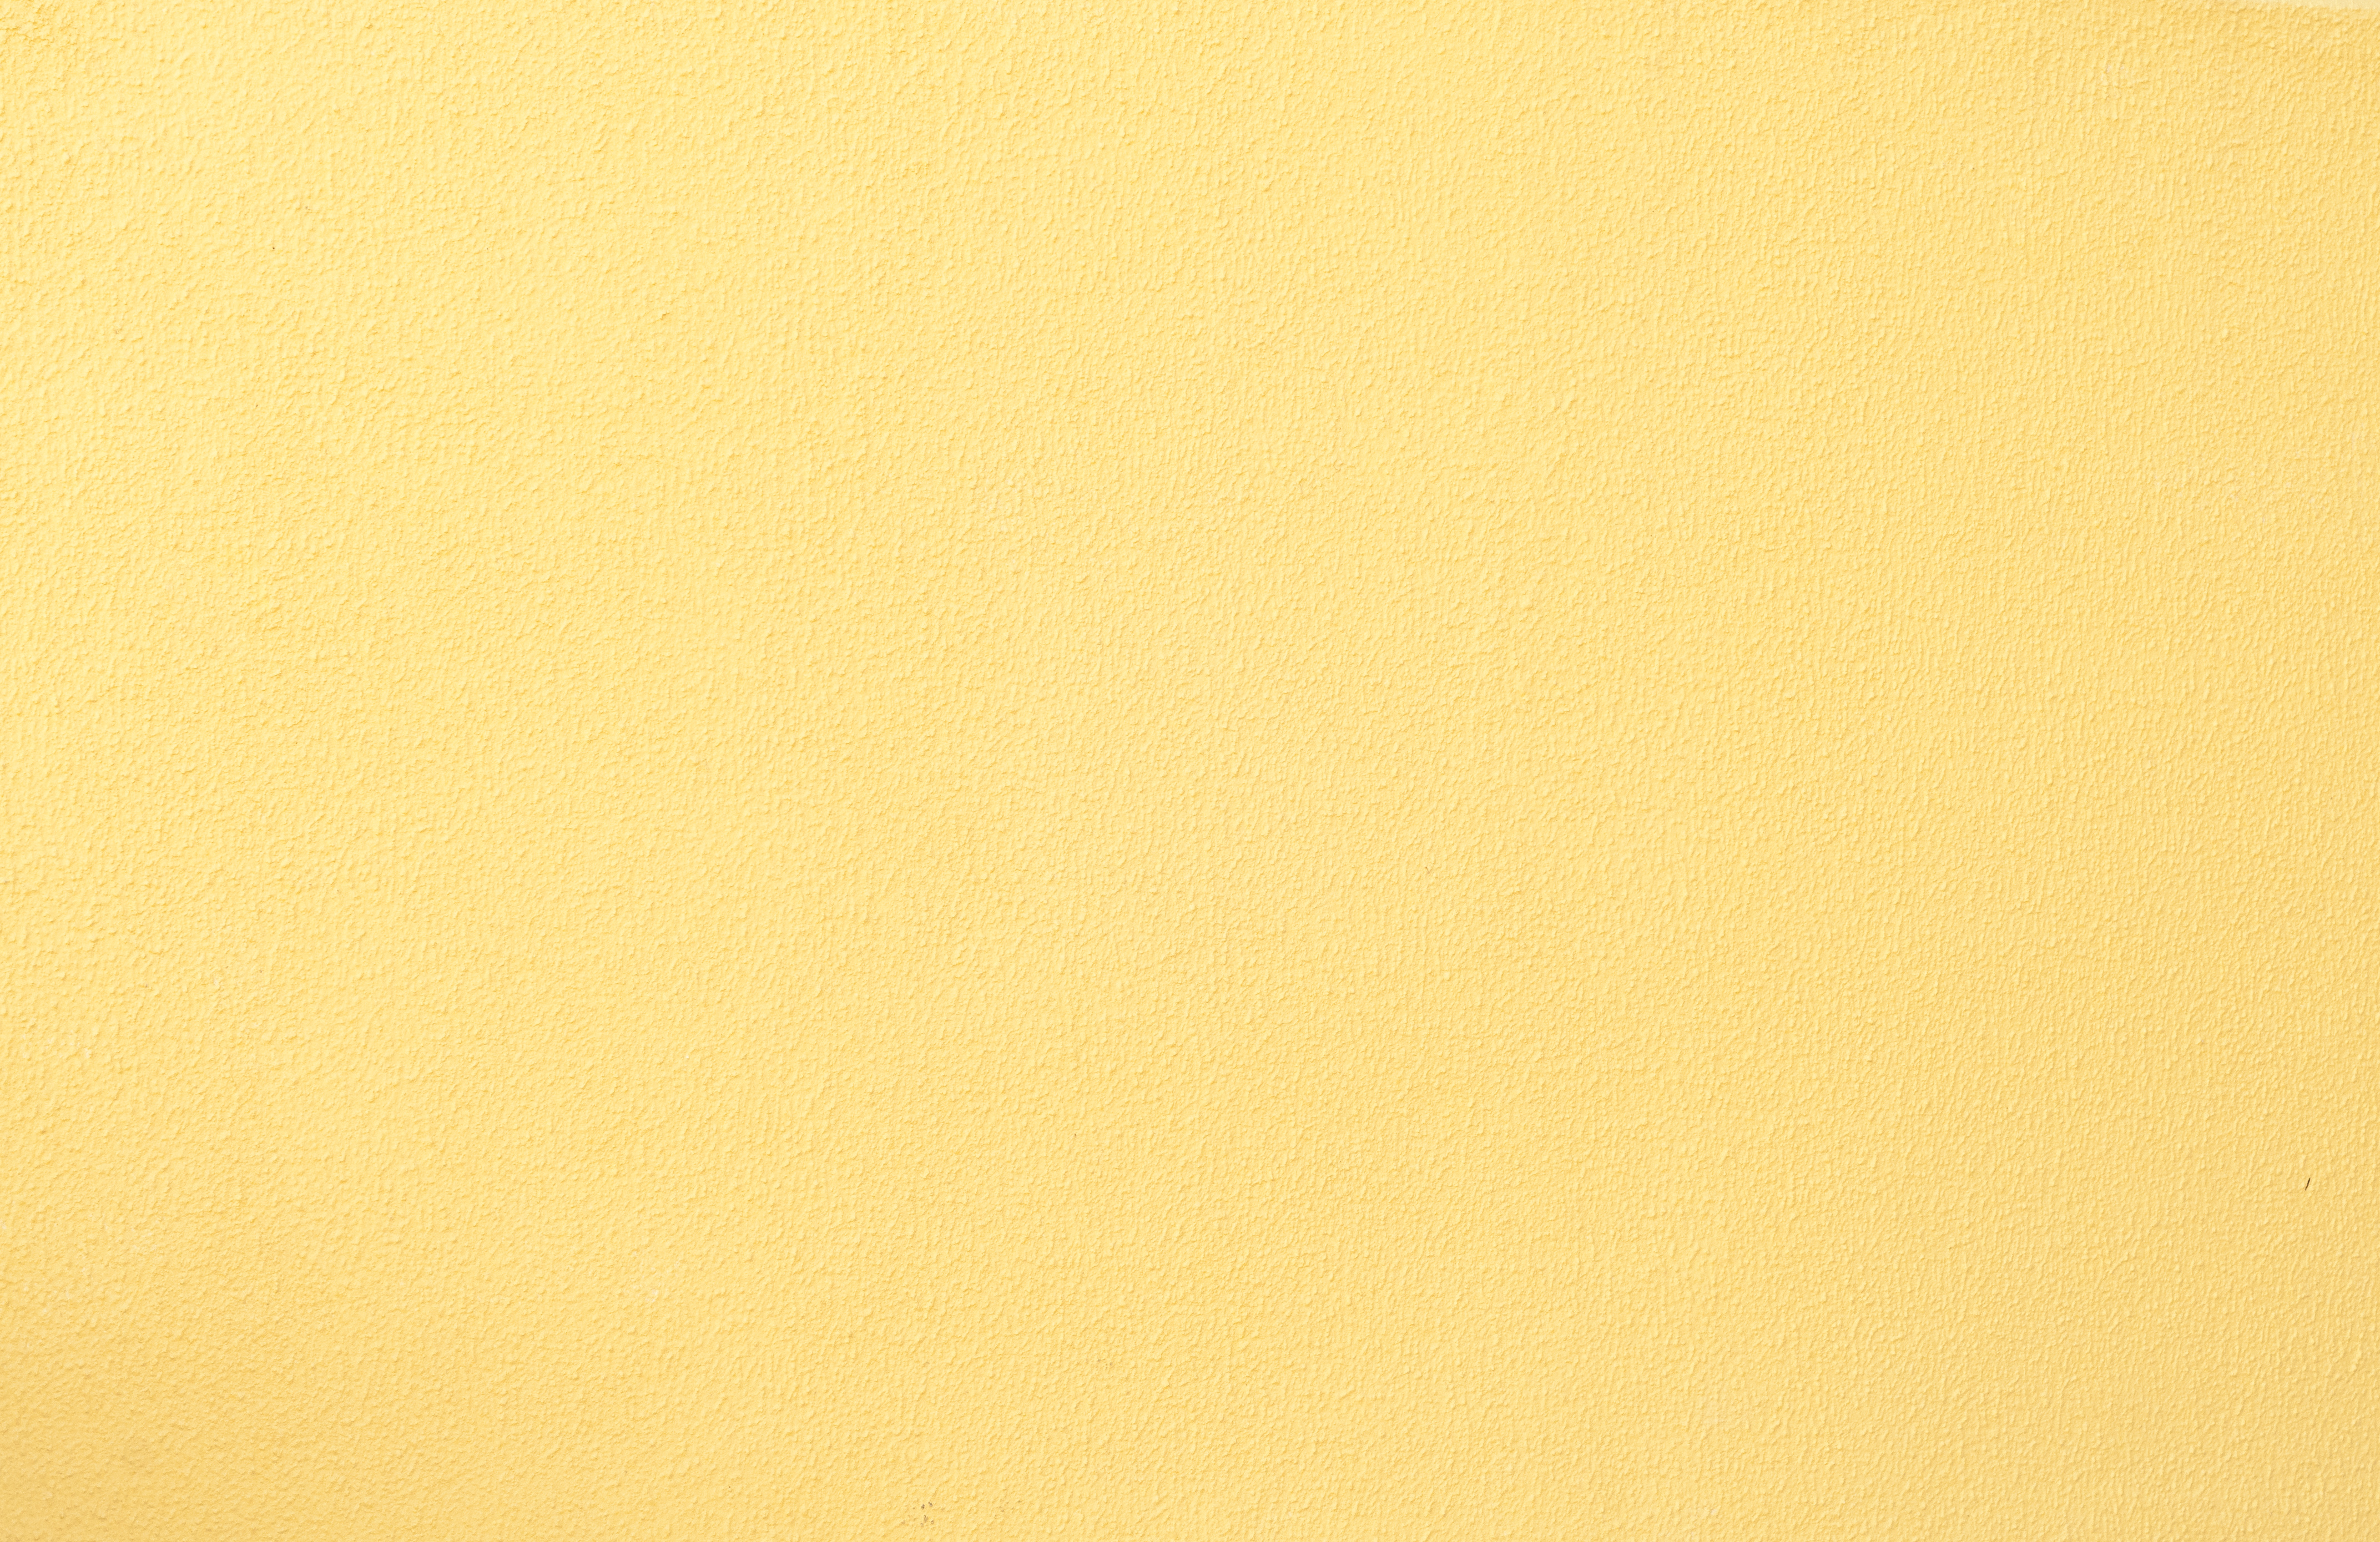 Subtle Plaster Concrete Yellow Wall - PatternPictures.com | wall ...